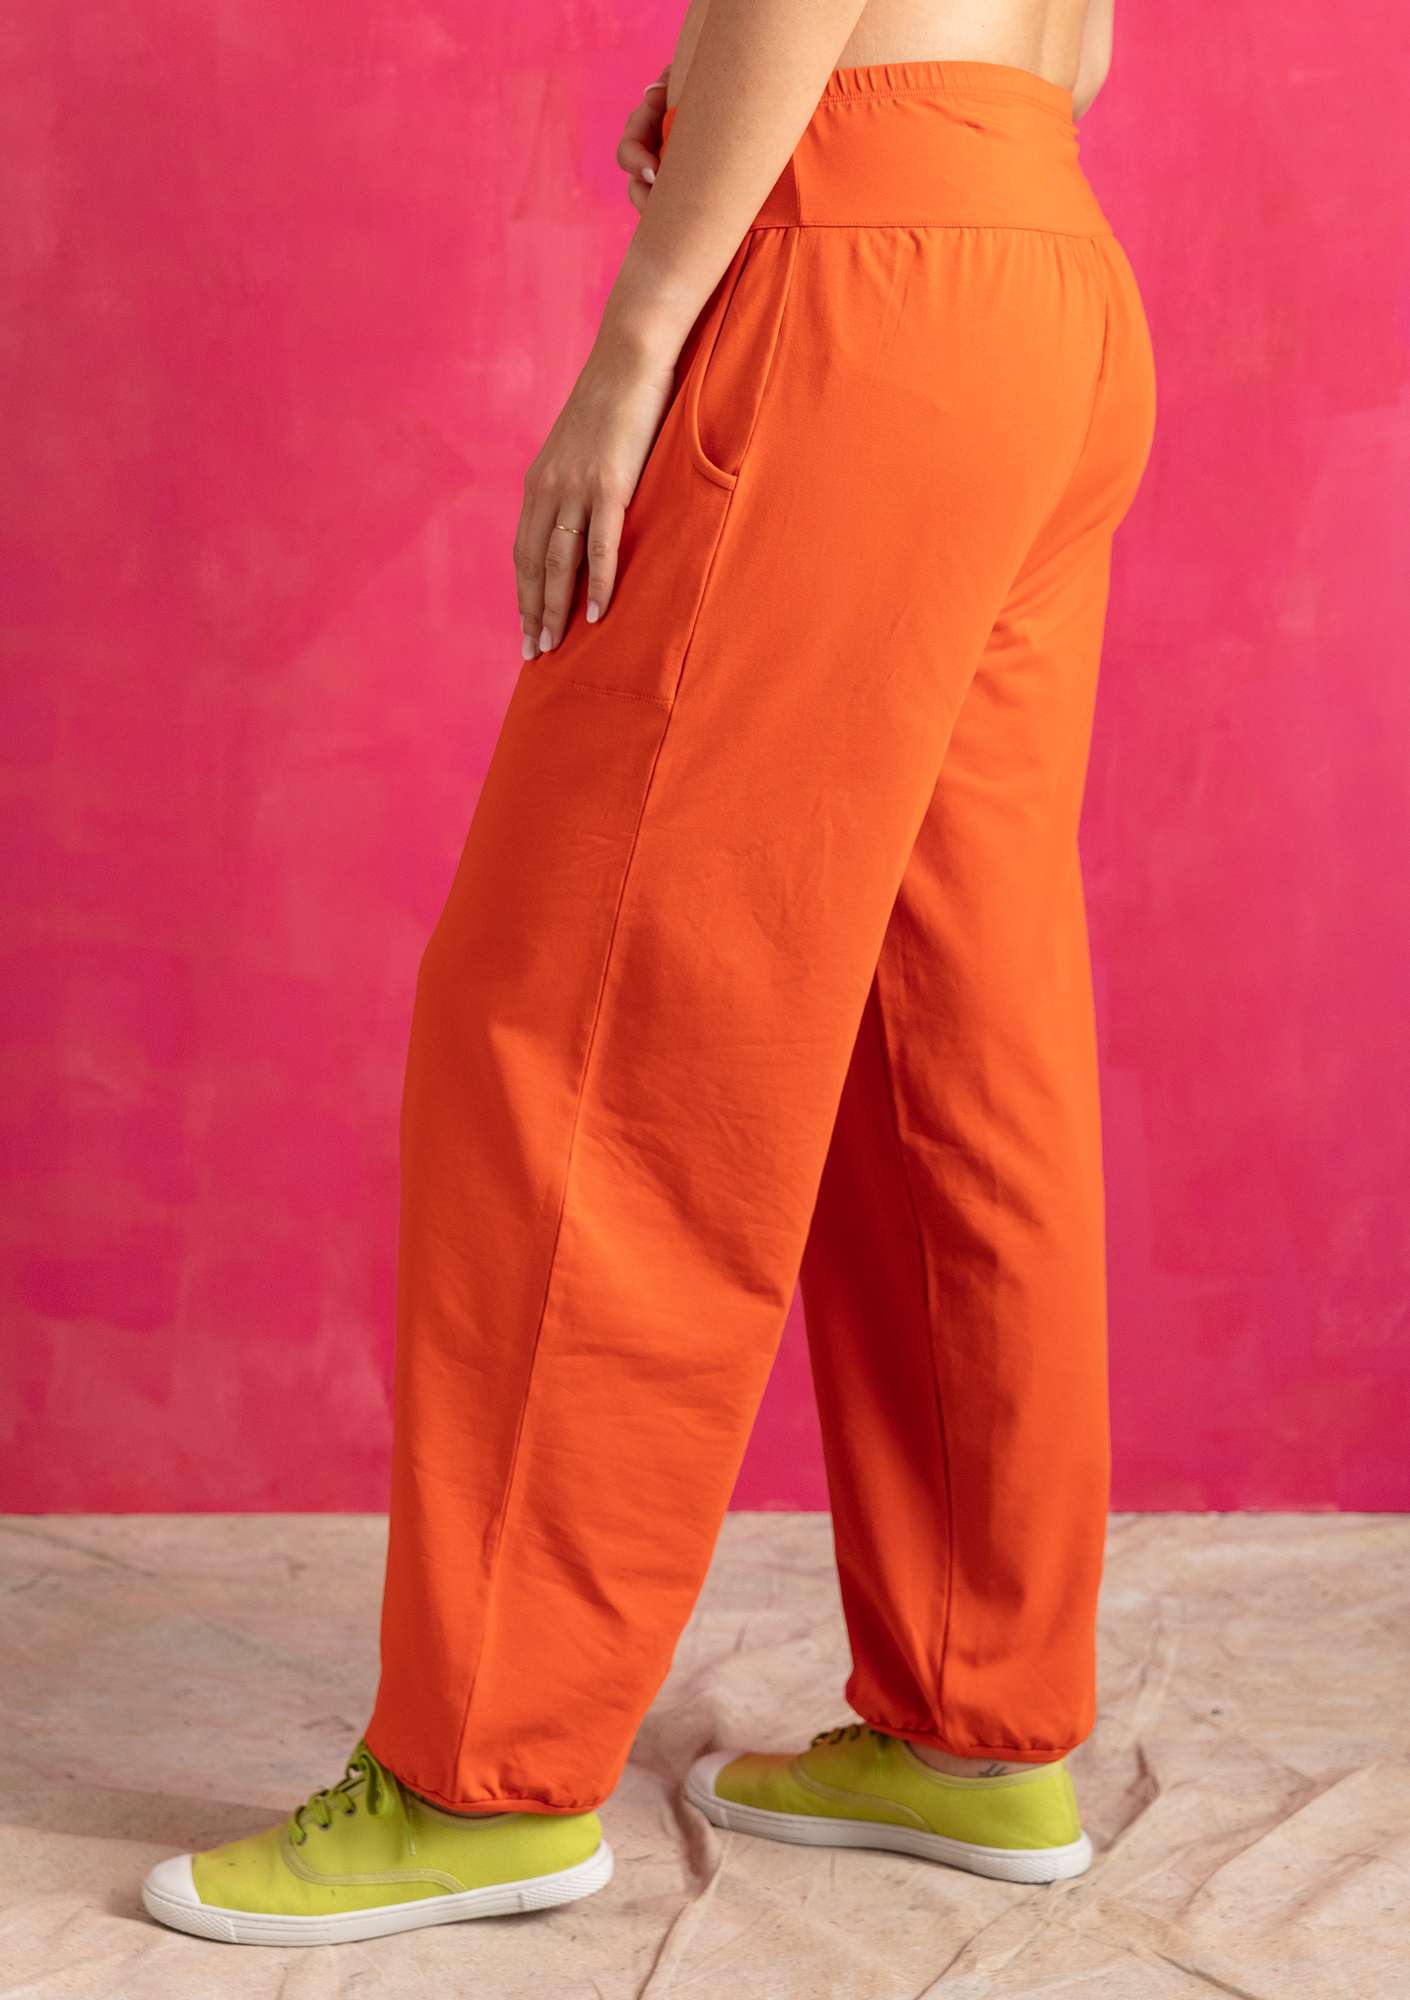 Solid-colored jersey pants 